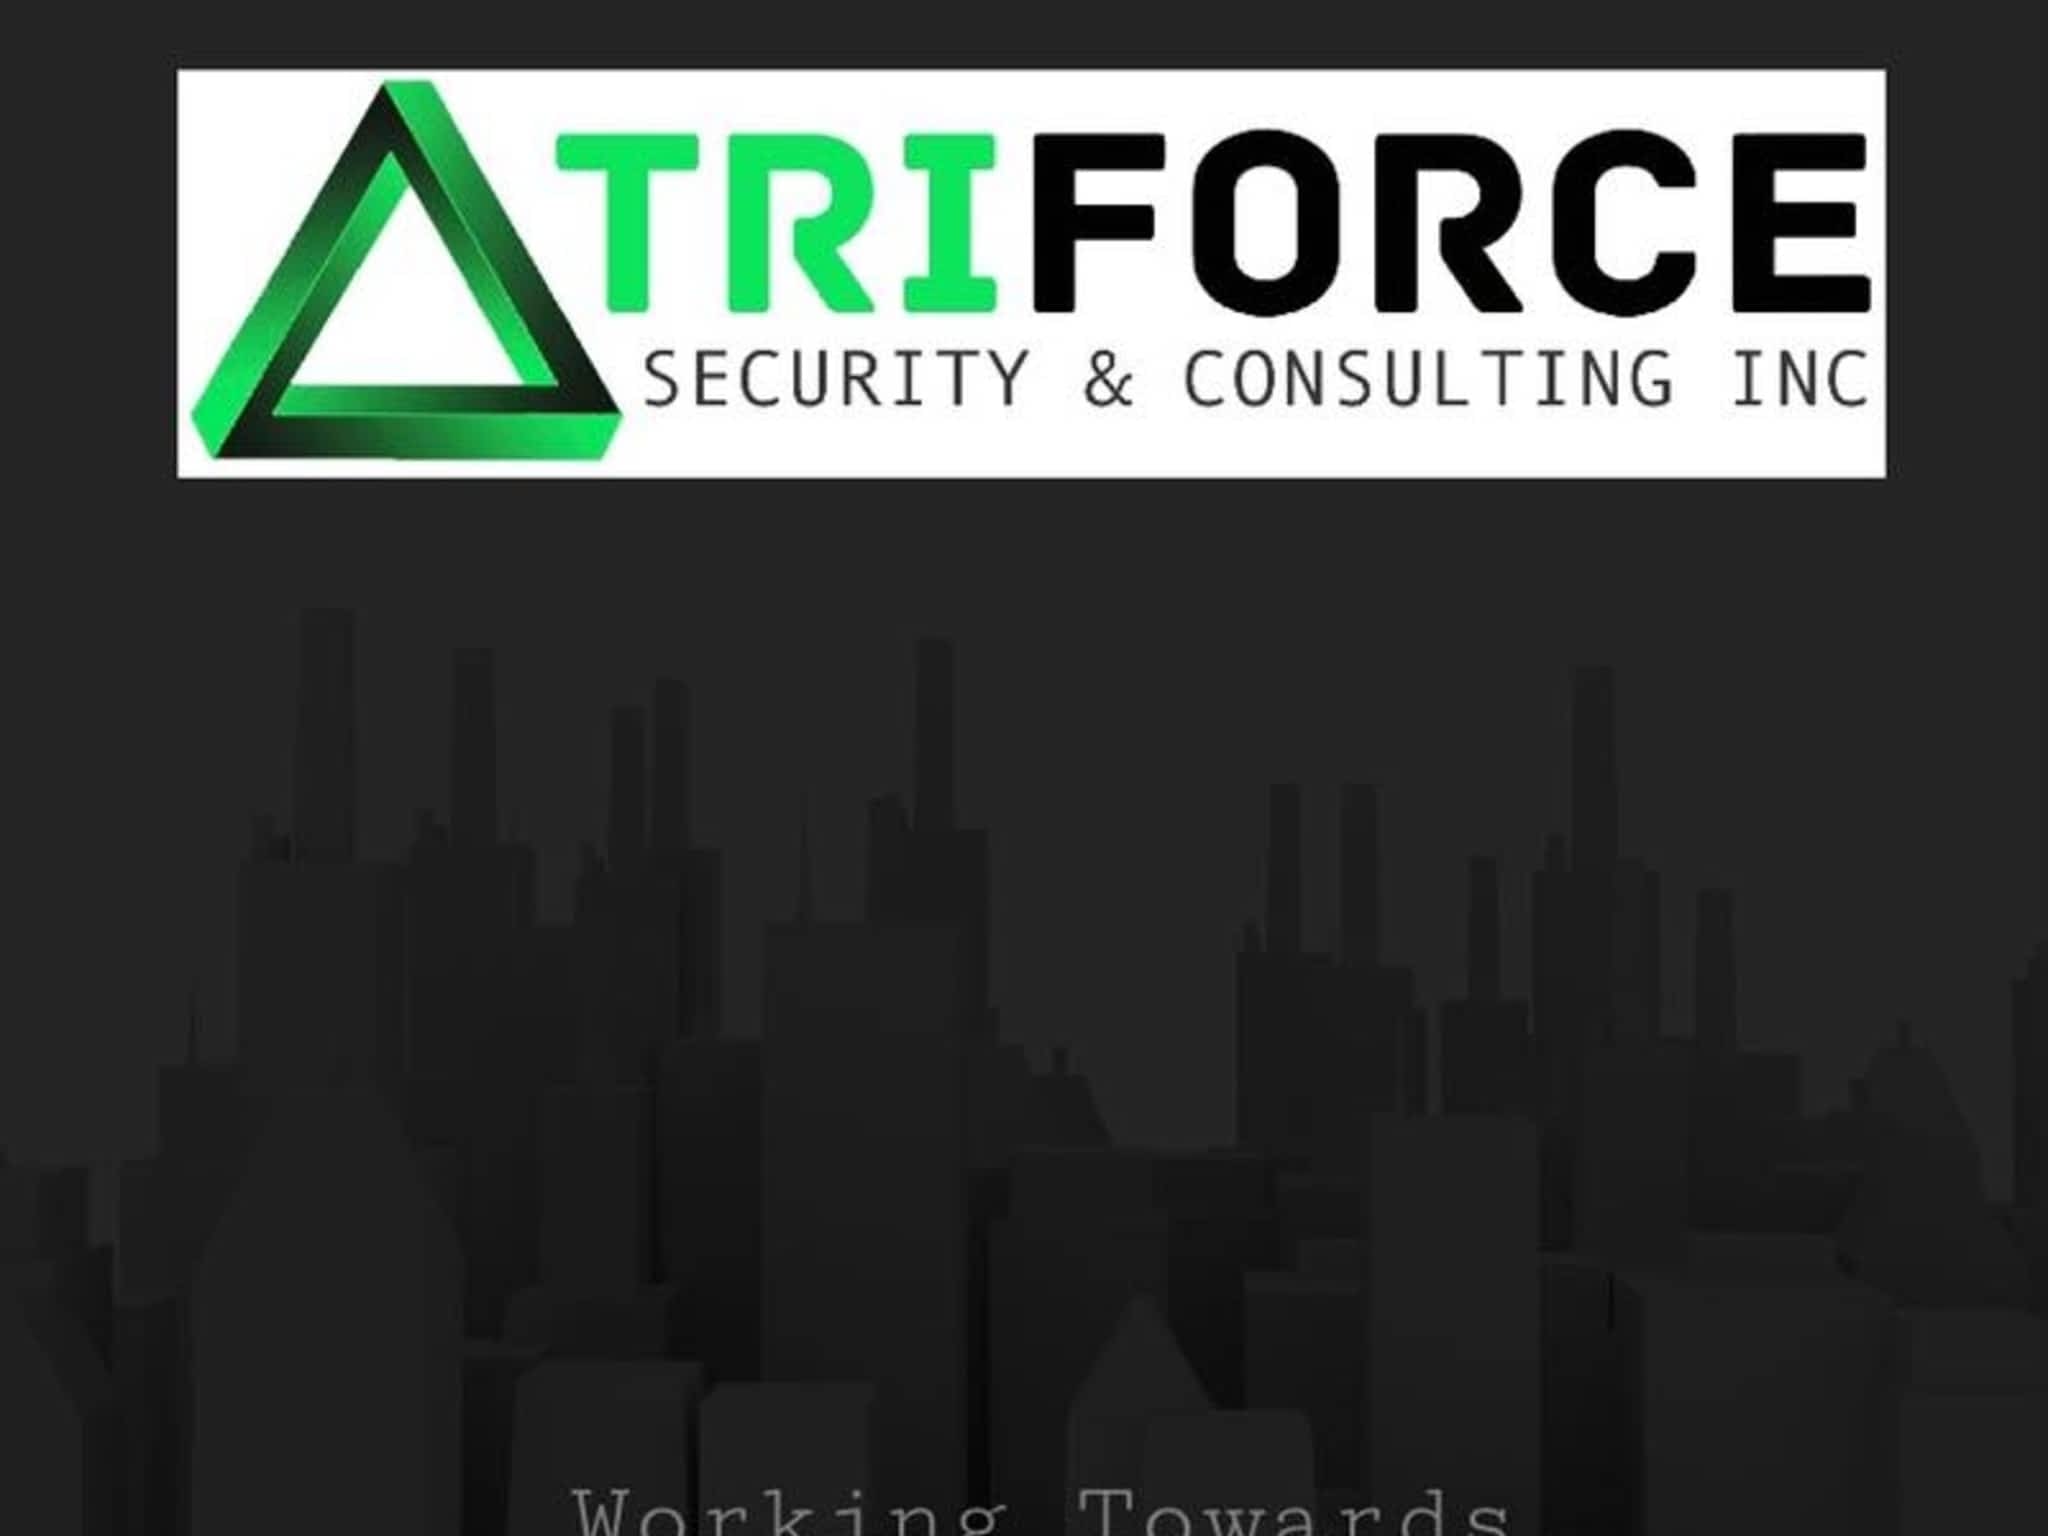 photo Triforce Security & Consulting Inc.